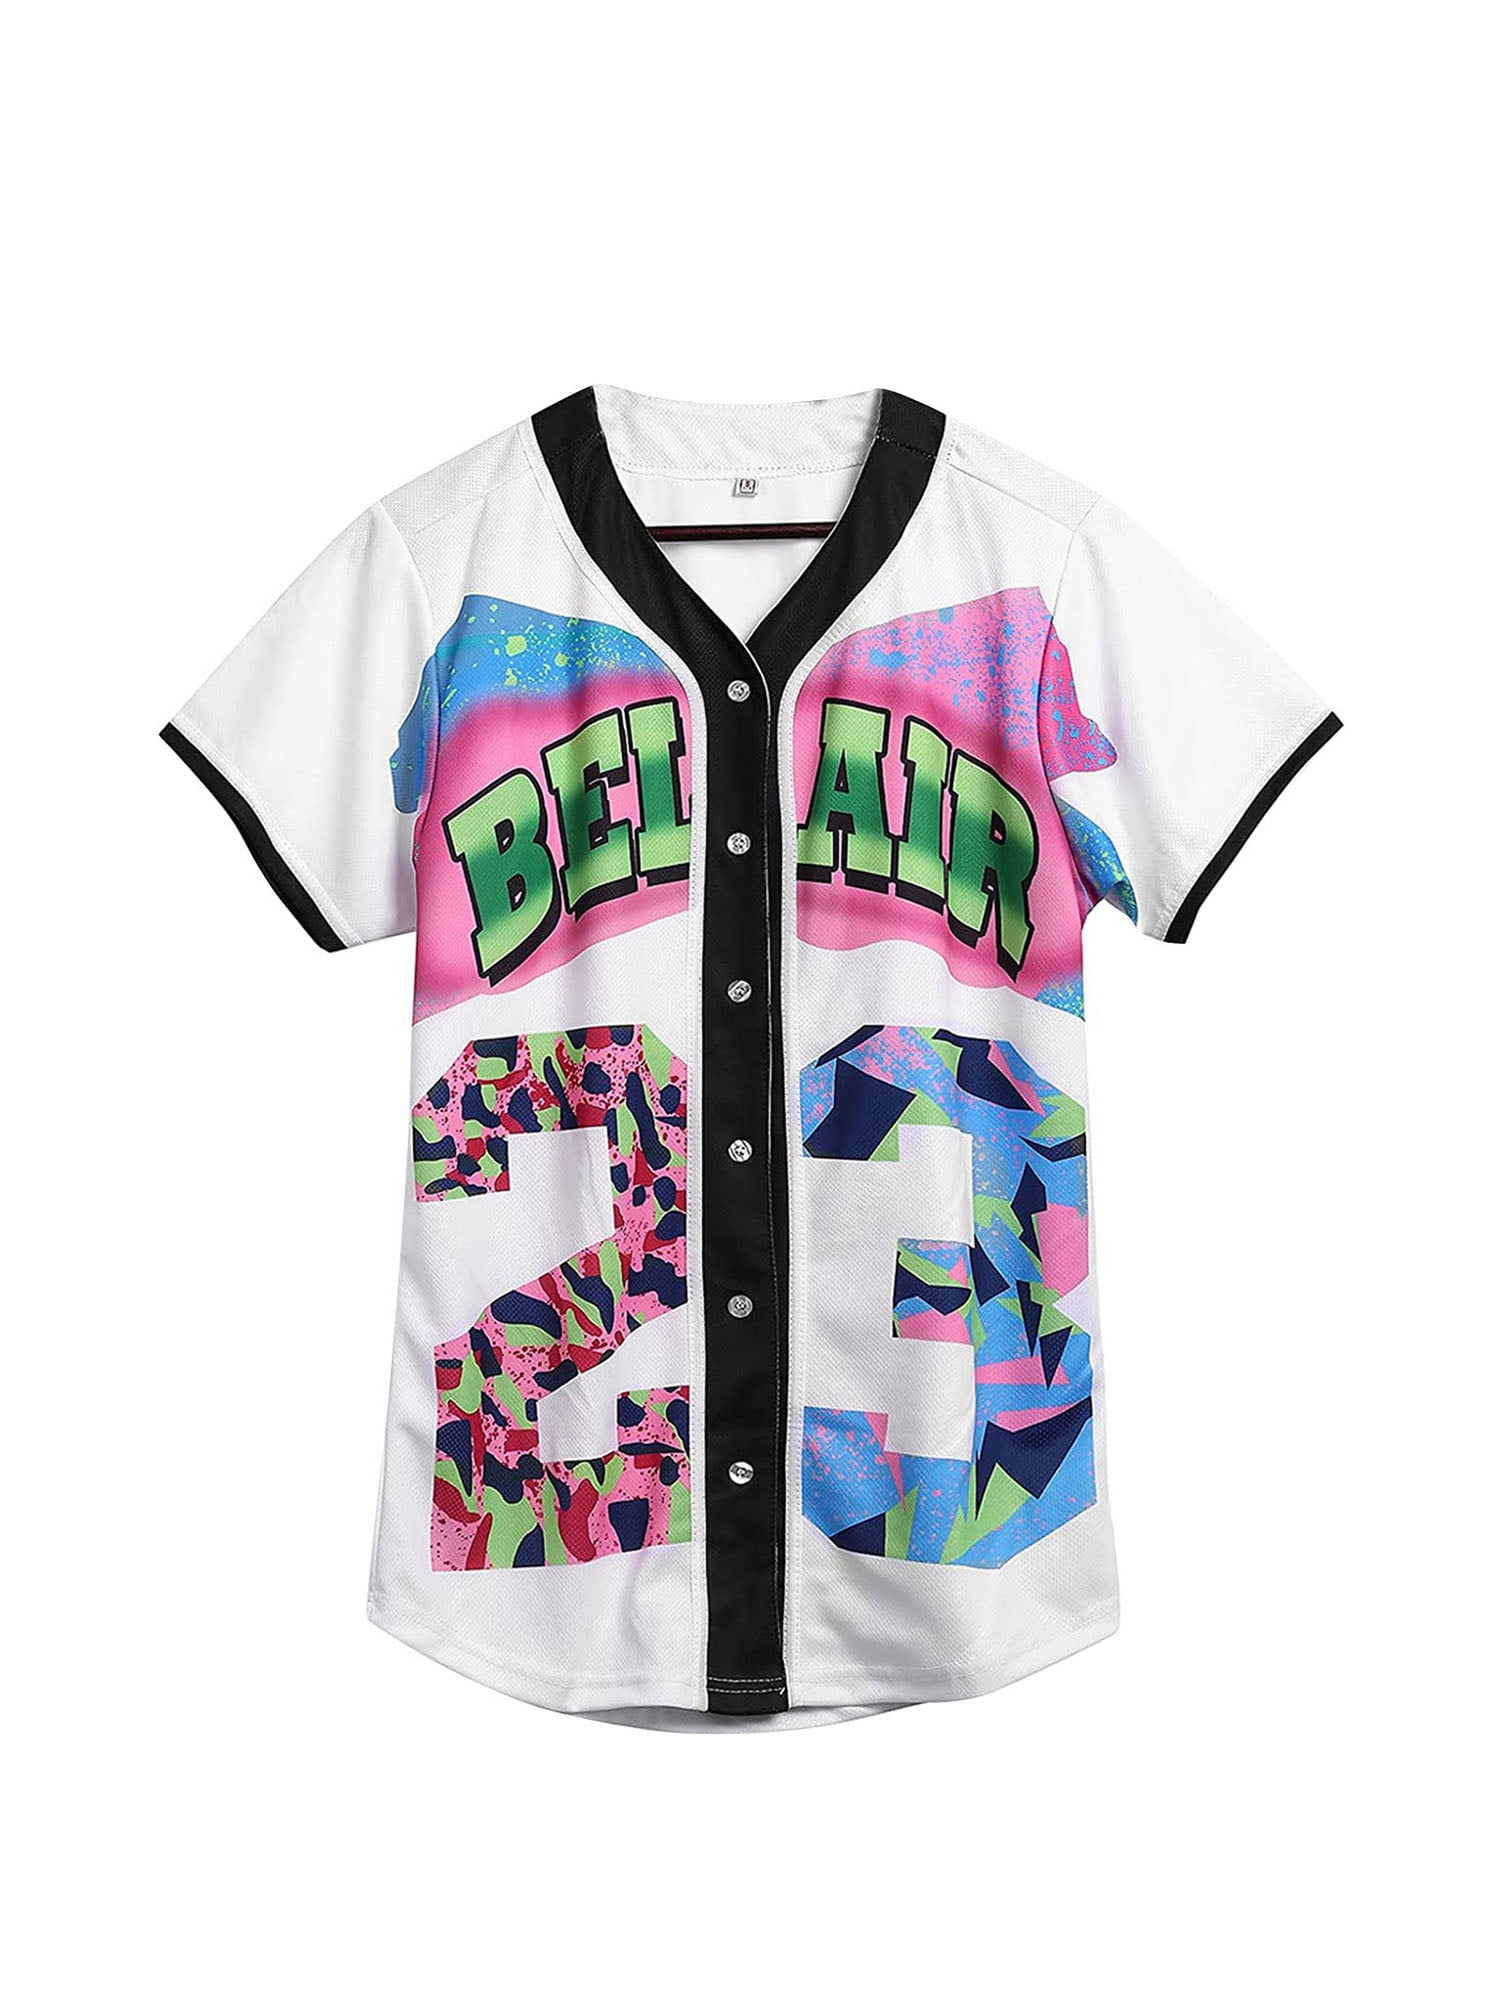 DreamJ 90s Outfit for Women, Bel Air Baseball Jersey Hip Hop Party Clothing  Short Sleeve Outfits Shirt for Party Club (Black S)… - Yahoo Shopping